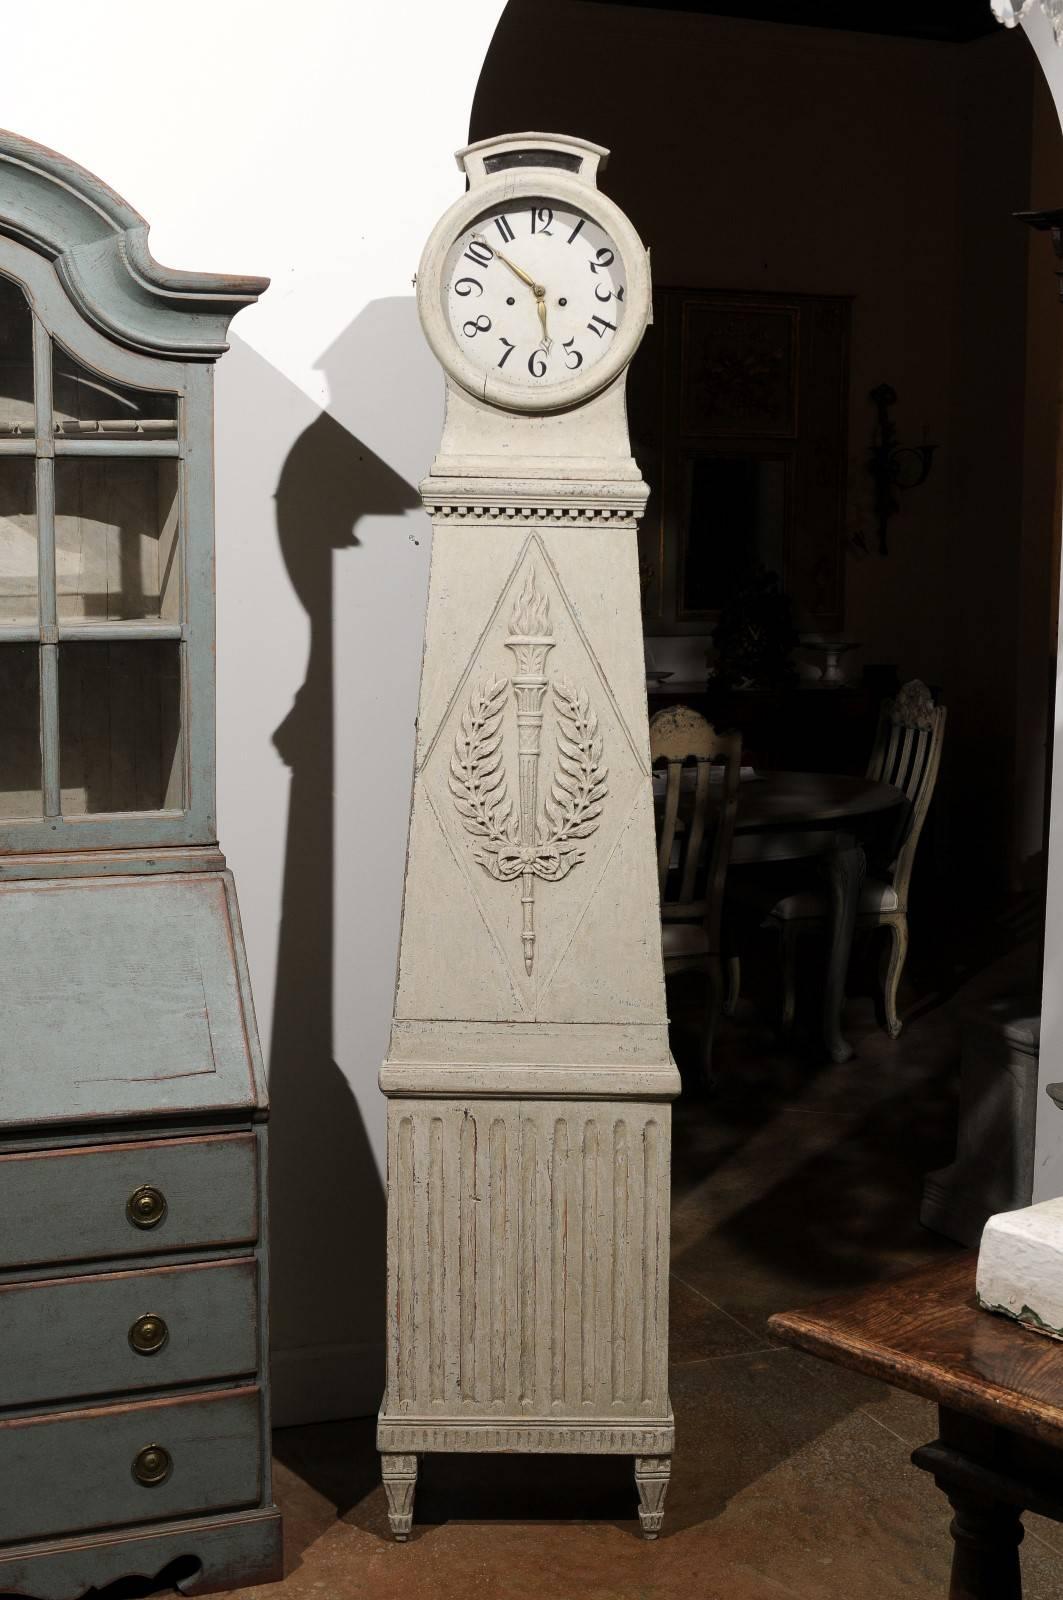 A Swedish Neoclassical style painted tall case clock from the mid 19th century, with original face and mechanisms. Featuring a face that is typical of what are commonly referred to as Mora clocks, this Swedish piece is topped with a delicately